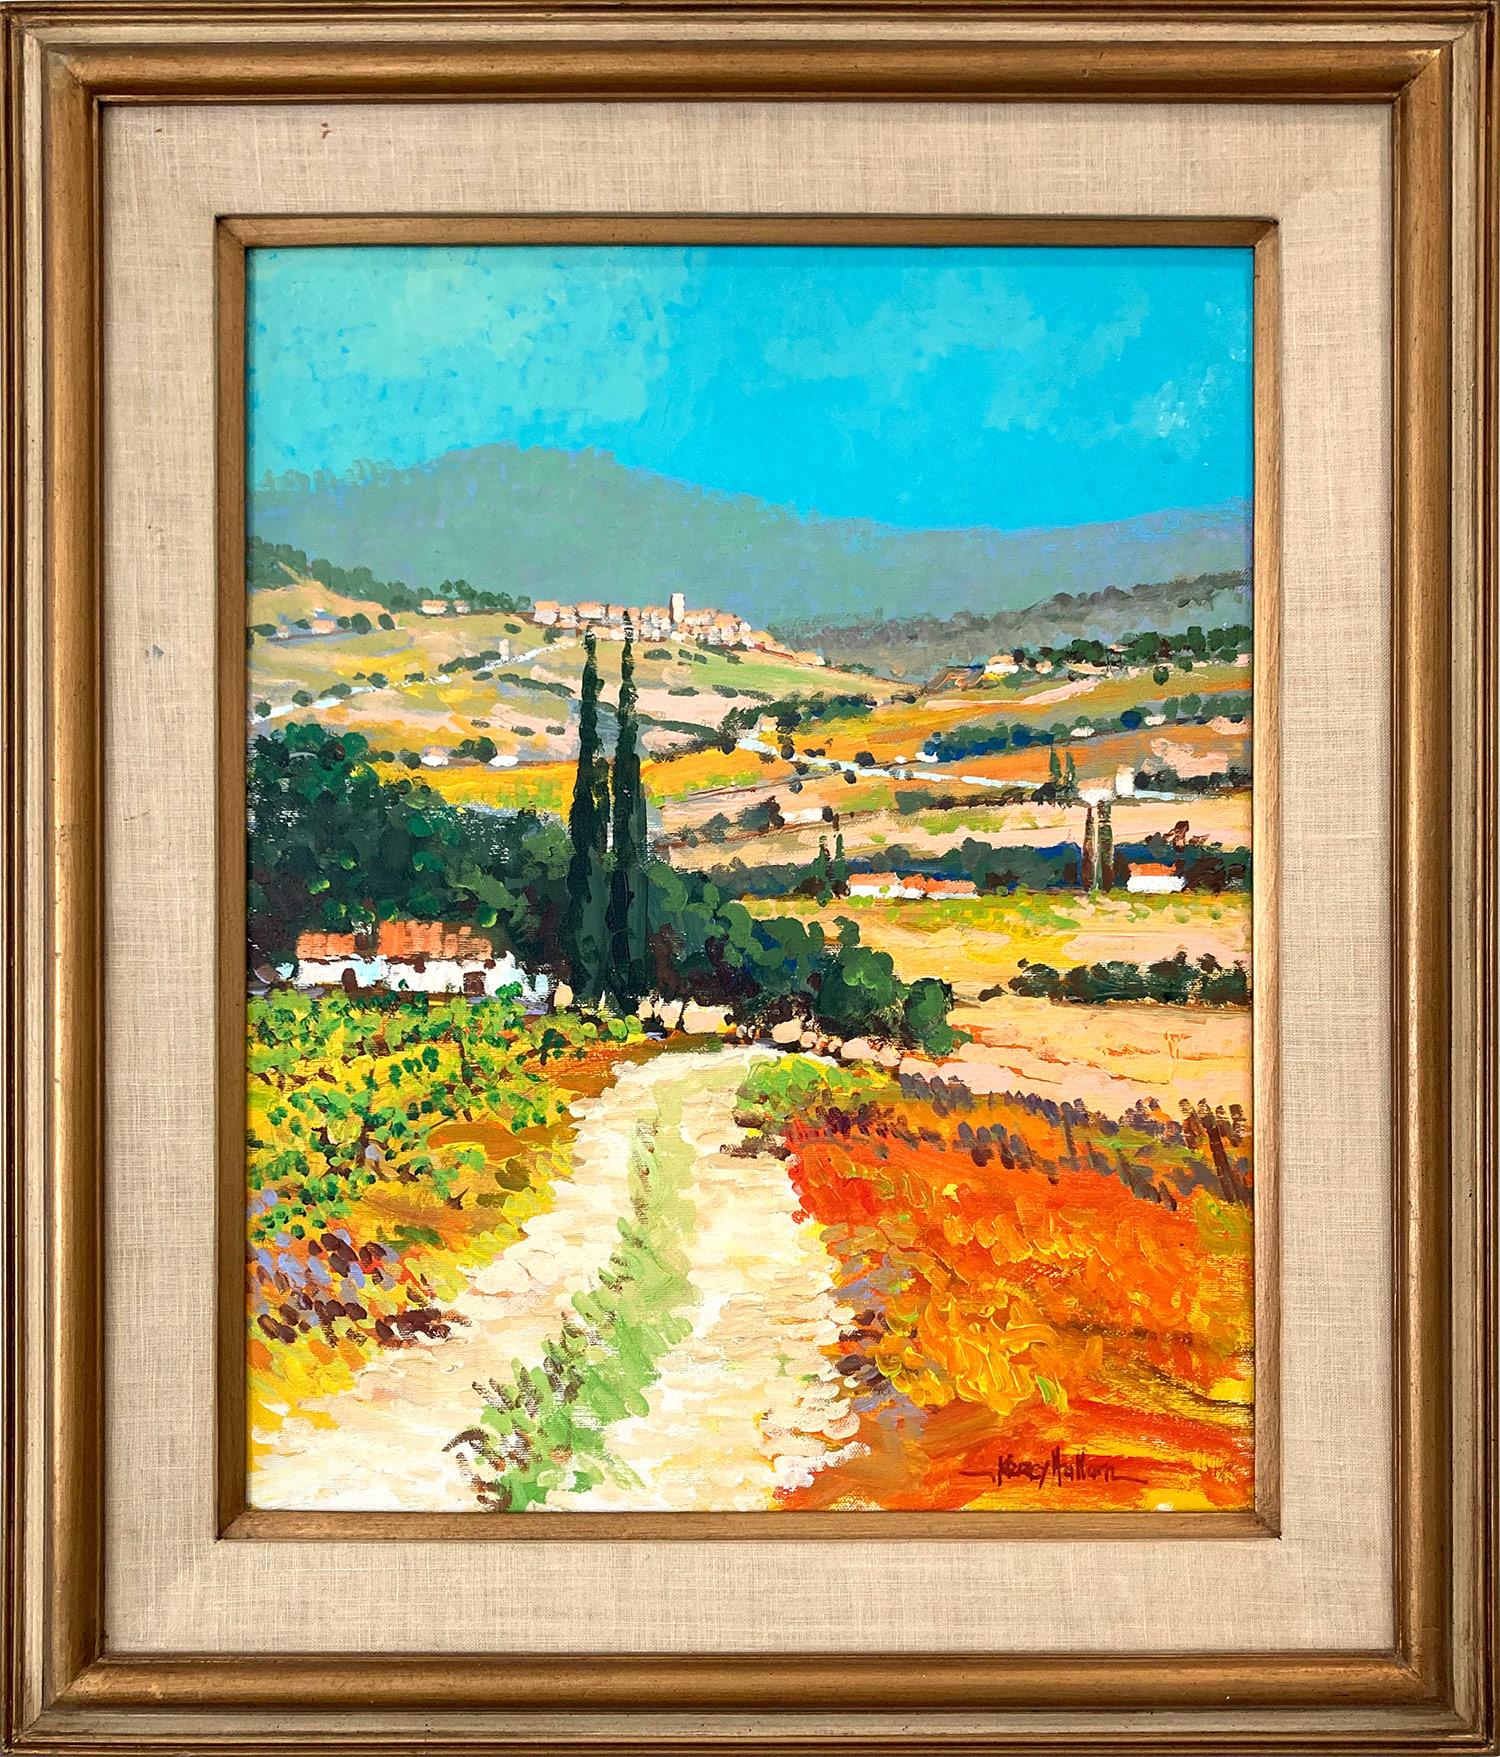 Kerry Hallam Landscape Painting - "Foothills of Tuscany" Post-Impressionist Italian View Painting on Canvas Framed